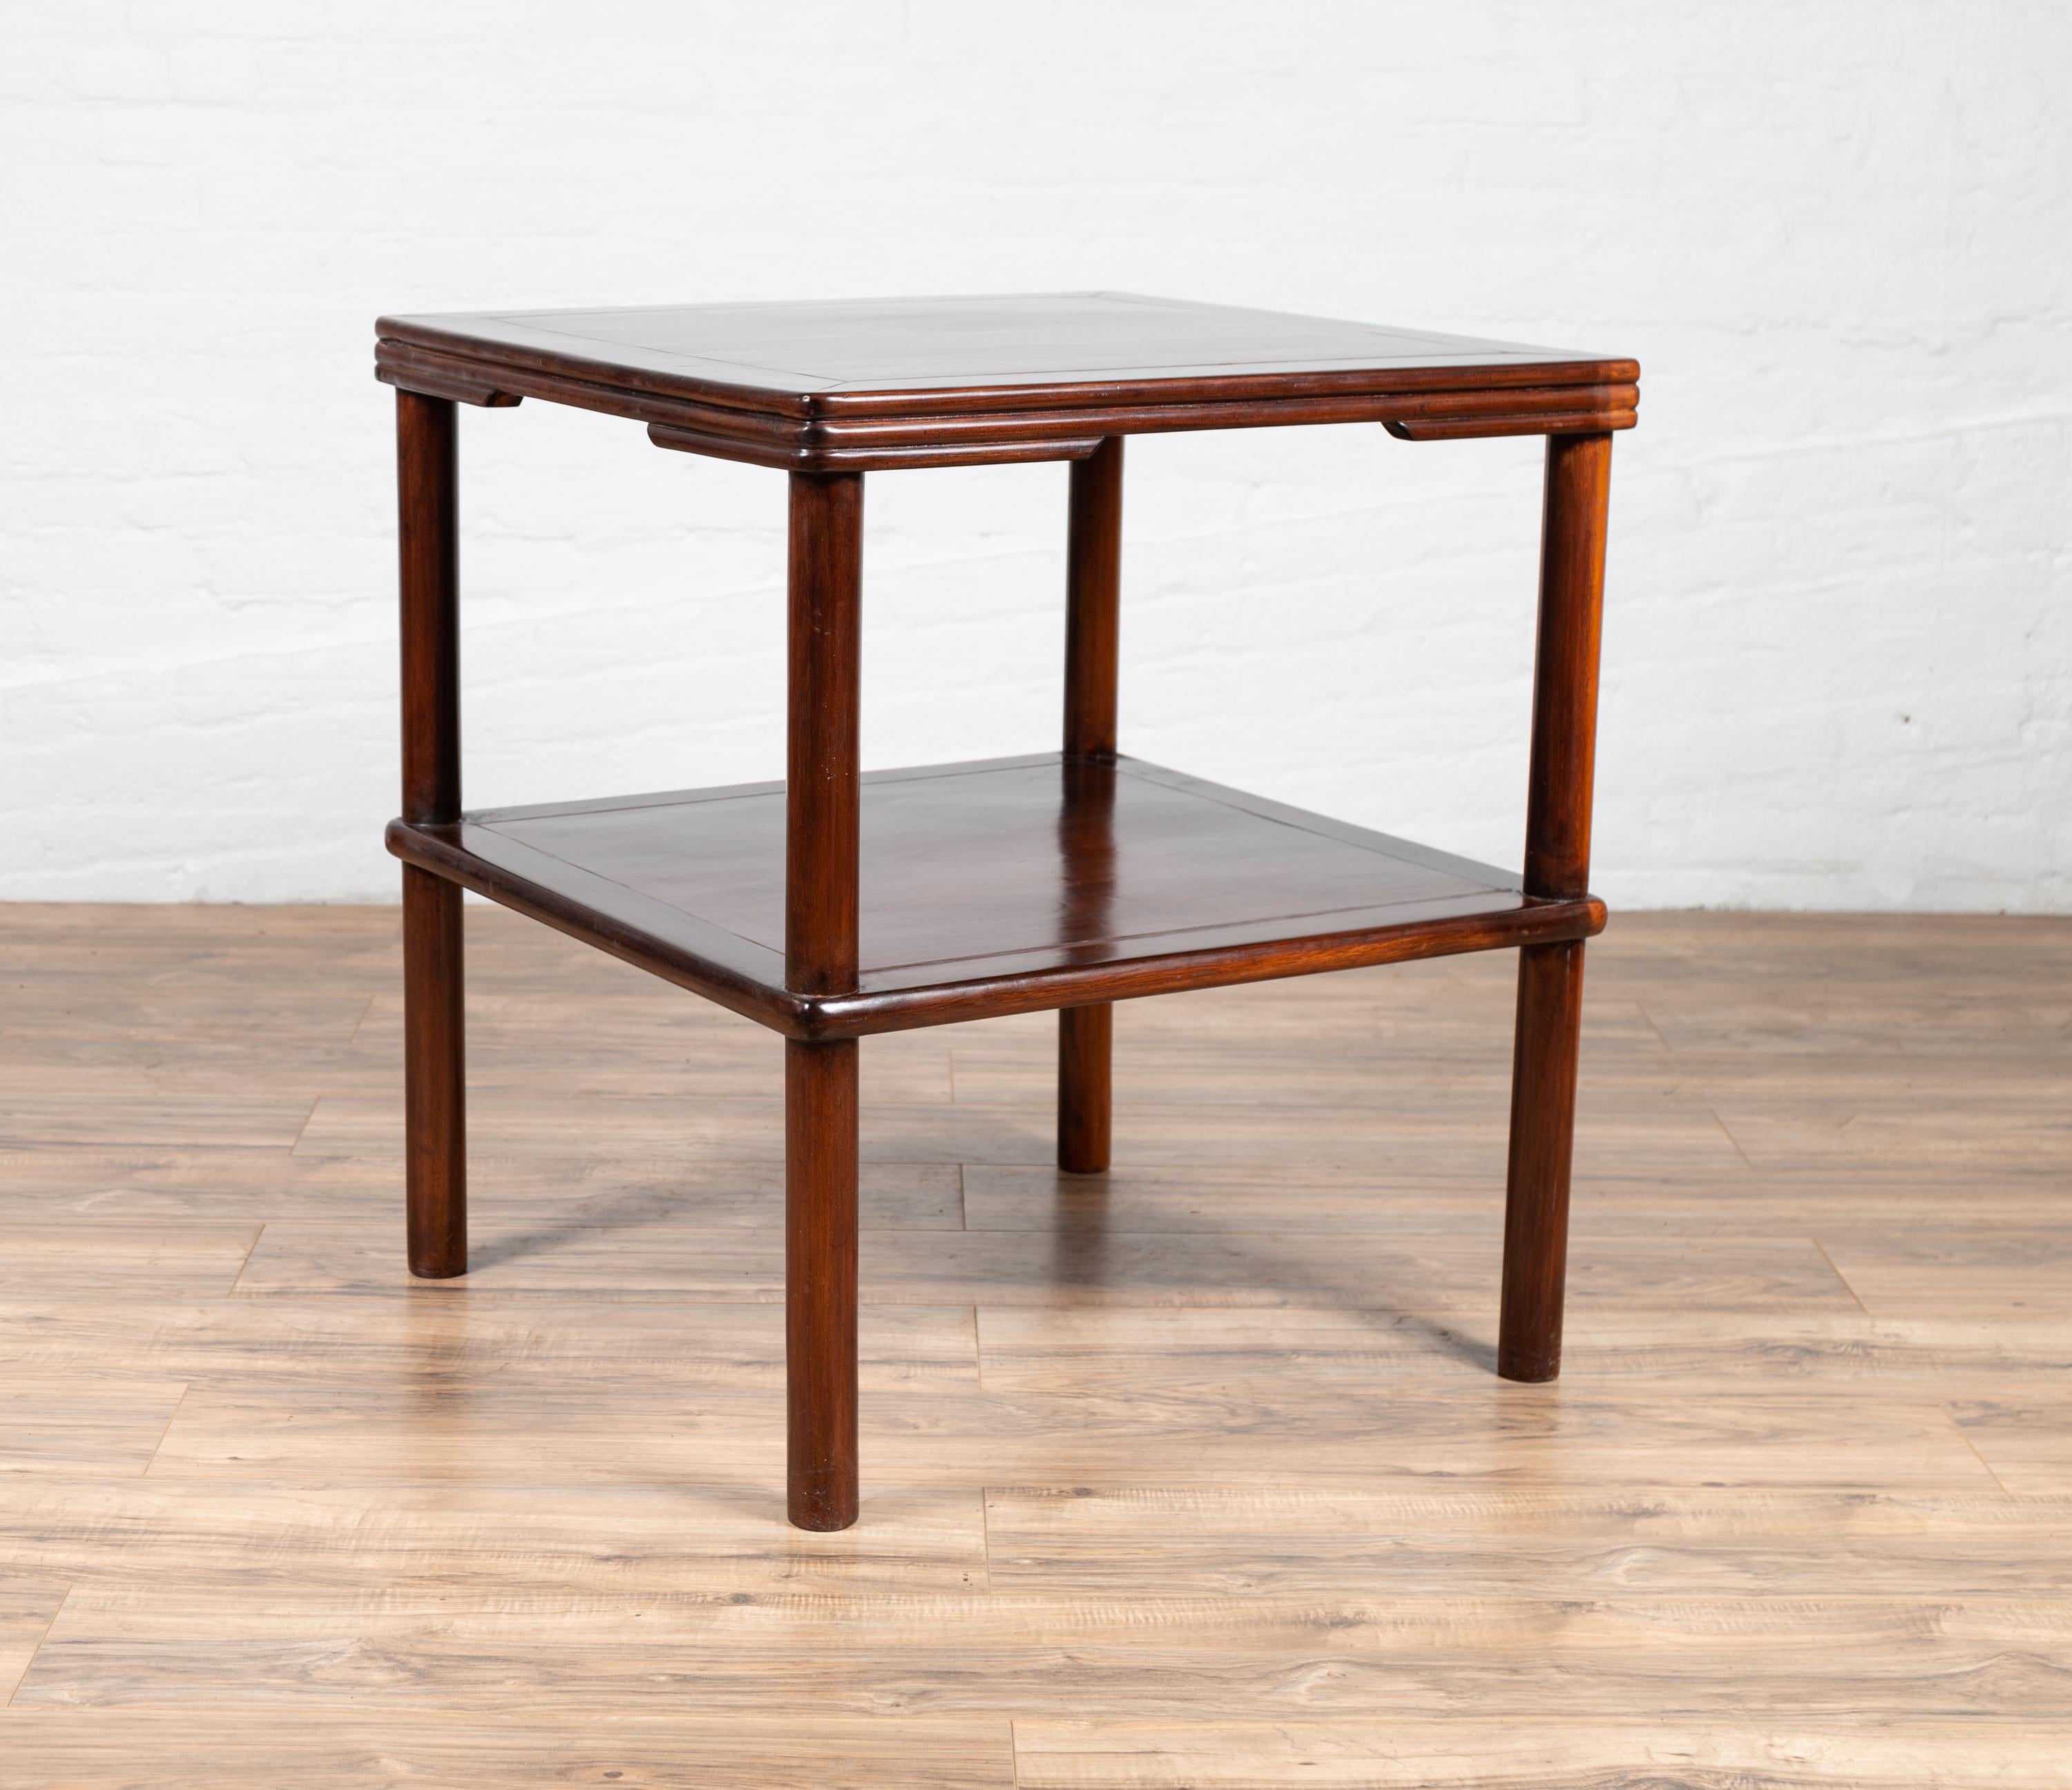 Chinese Vintage Midcentury Square-Shaped Side Table with Lower Shelf For Sale 3